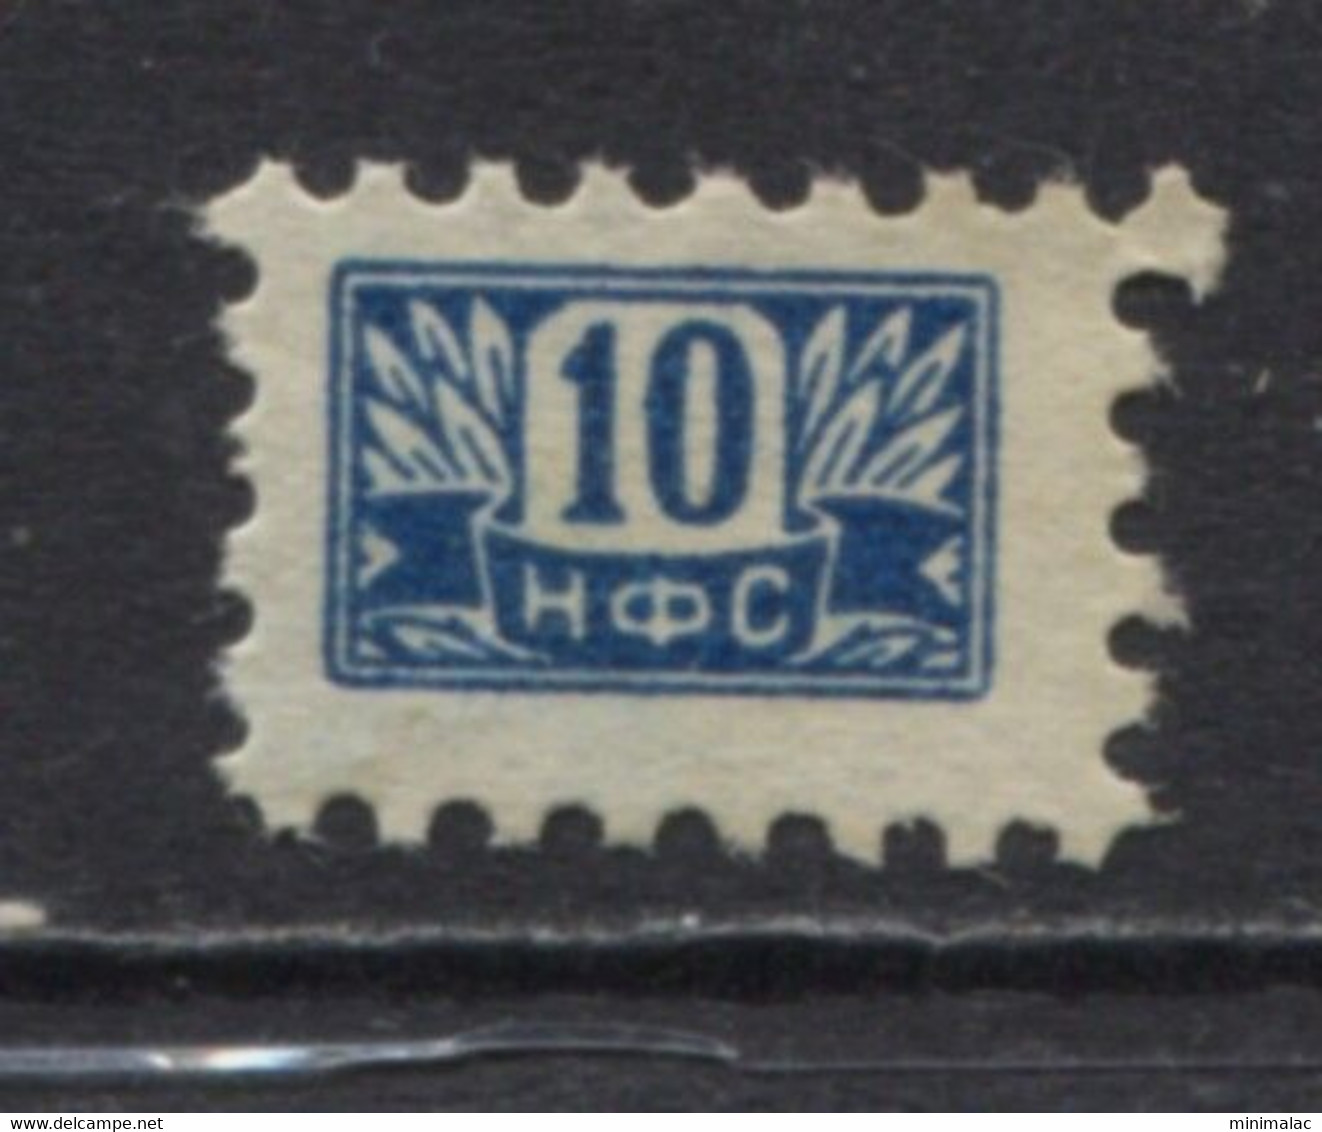 Yugoslavia 1952, Stamp For Membership, NFS, Labor Union, Administrative Stamp - Revenue, Tax Stamp, 10d - Officials